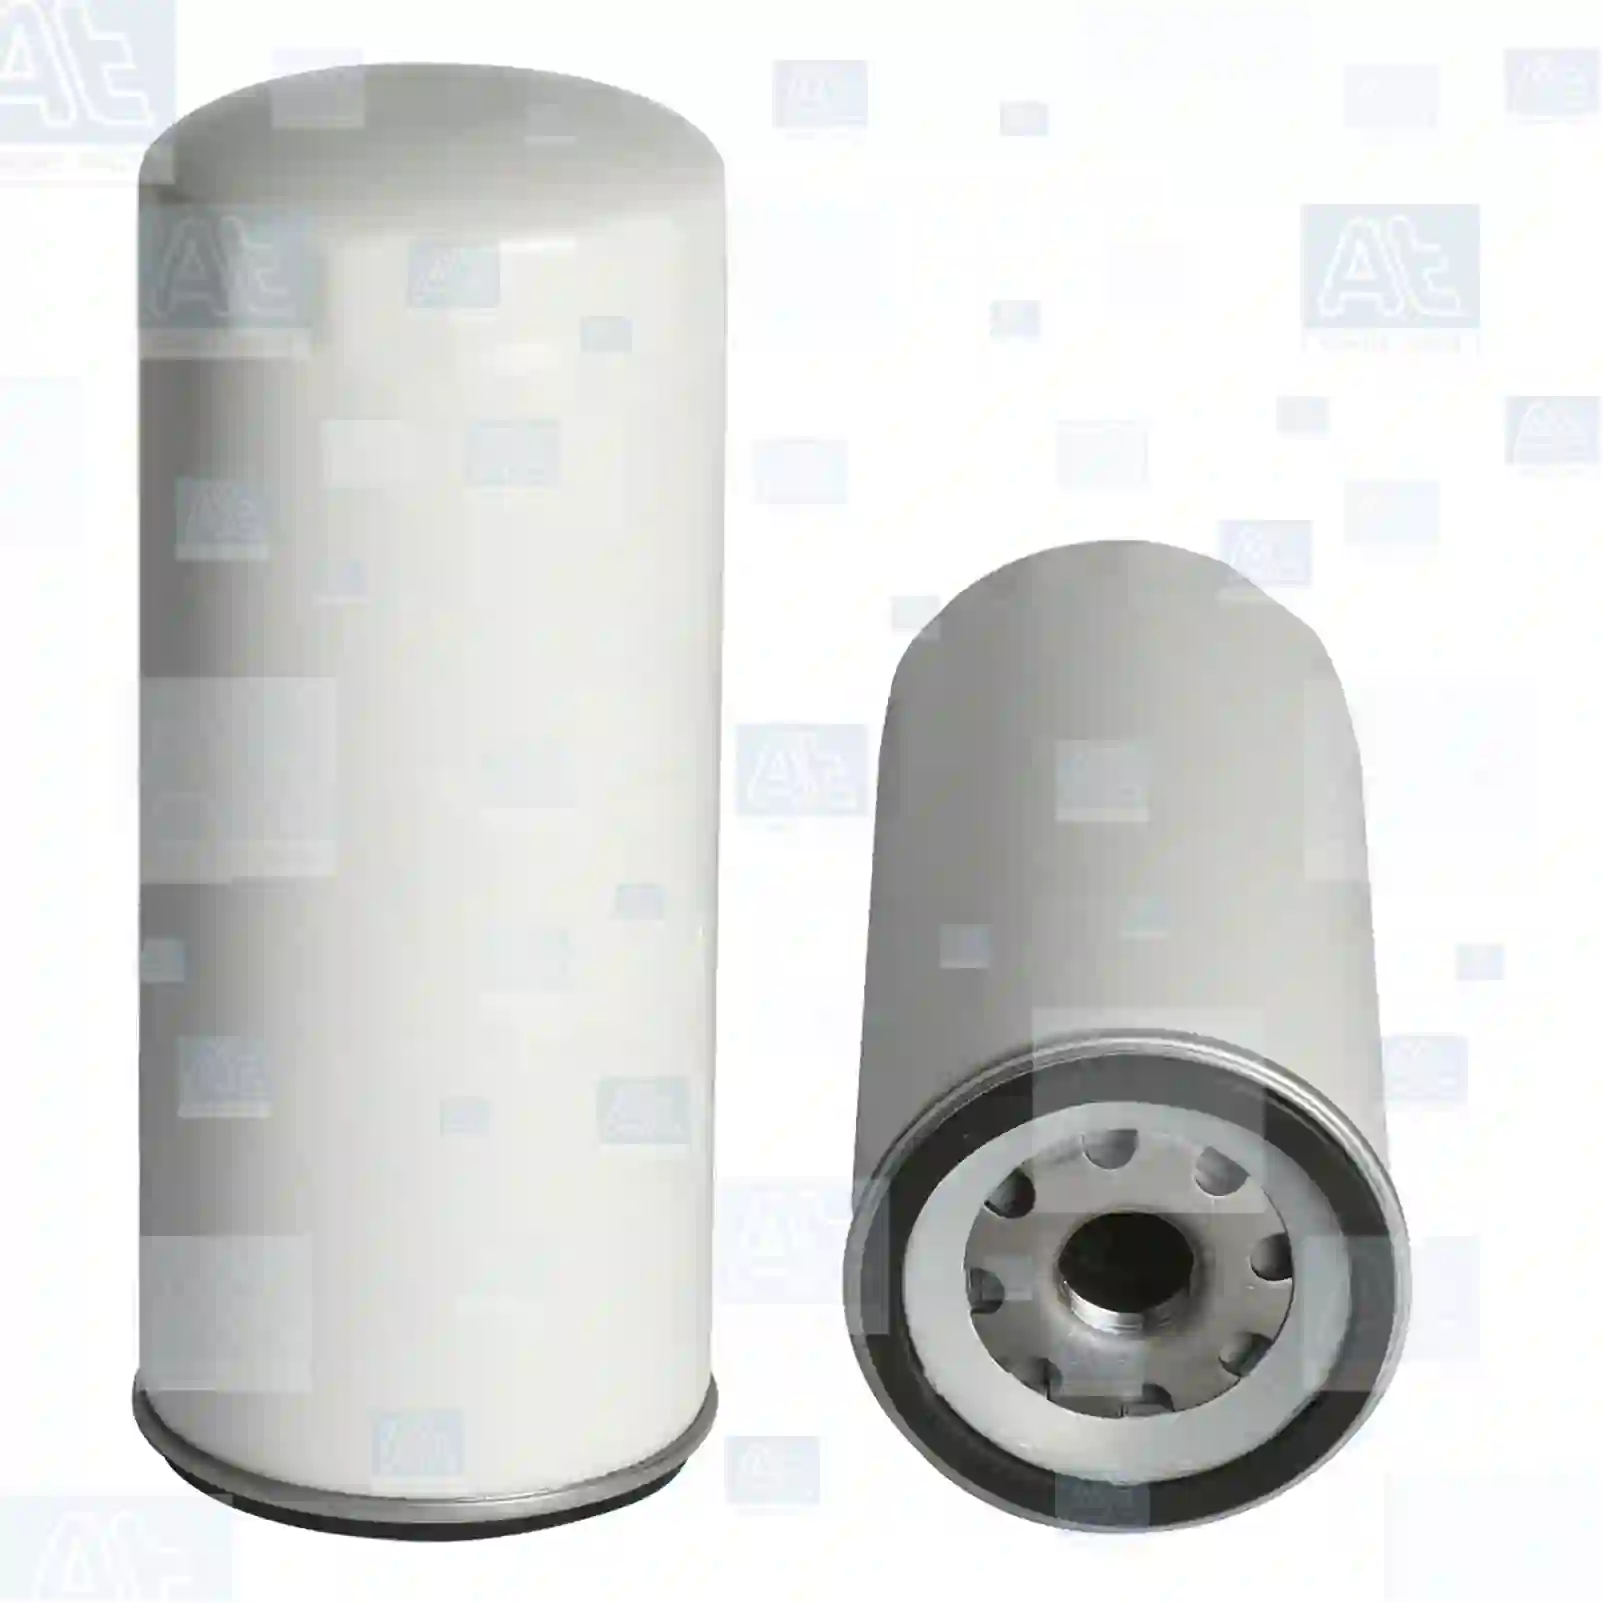 Oil filter, 77700094, 40367914, 99100562, 485GB3191, 1R-0658, 1R-0739, 1R-1807, 1W-3300, 2P-4004, 3Y0-900X, 5P-1119, 0003600140, 69704773, 988693, 98869300, 01174420, D5000681013, GH27096, 42537127, 99100562, Y03601712, Y03725604, Y05008003, Y05809611, YO3601712, YO5008003, 5011417, 5011502, ABPN10GLF3675, DNP553191, H27096, 6439393, 6439392, 9414100547, H200W23, H200W24, 5221170569, 42537127, 42546374, 500055336, 5001021129, 5010550600, 01/798593, 5010550600, 7211206, 20539275, 21707136, 2191P553191, 21939324, 484GB3191C, 485GB3191, 485GB3191A, 485GB3191B, 485GB3191C, 485GB3191D, 485GB3232, 5000133555, 51055040056, 81332150011, 5010550600, 3661840255, 52211-70569, 52217-06577, W1250599, 0020709459, 485GB3191A, 485GB3191B, 5000133555, 5000670699, 5000670700, 5000670701, 5000670796, 500067079L, 5000681013, 5000682146, 5001021129, 5001546650, 5001846641, 5001846642, 5010550600, 7421700201, 7423114230, LUS4417, PH4849, 1117285, 1117295, 1347726, 2059778, 2077885, 1216400551, 5221170569, 5221706577, 21401064, 21707134, 3130936, 466634, 4666343, 4787362, 4797362, 60466634, 6884417, 85114041, ZG01695-0008 ||  77700094 At Spare Part | Engine, Accelerator Pedal, Camshaft, Connecting Rod, Crankcase, Crankshaft, Cylinder Head, Engine Suspension Mountings, Exhaust Manifold, Exhaust Gas Recirculation, Filter Kits, Flywheel Housing, General Overhaul Kits, Engine, Intake Manifold, Oil Cleaner, Oil Cooler, Oil Filter, Oil Pump, Oil Sump, Piston & Liner, Sensor & Switch, Timing Case, Turbocharger, Cooling System, Belt Tensioner, Coolant Filter, Coolant Pipe, Corrosion Prevention Agent, Drive, Expansion Tank, Fan, Intercooler, Monitors & Gauges, Radiator, Thermostat, V-Belt / Timing belt, Water Pump, Fuel System, Electronical Injector Unit, Feed Pump, Fuel Filter, cpl., Fuel Gauge Sender,  Fuel Line, Fuel Pump, Fuel Tank, Injection Line Kit, Injection Pump, Exhaust System, Clutch & Pedal, Gearbox, Propeller Shaft, Axles, Brake System, Hubs & Wheels, Suspension, Leaf Spring, Universal Parts / Accessories, Steering, Electrical System, Cabin Oil filter, 77700094, 40367914, 99100562, 485GB3191, 1R-0658, 1R-0739, 1R-1807, 1W-3300, 2P-4004, 3Y0-900X, 5P-1119, 0003600140, 69704773, 988693, 98869300, 01174420, D5000681013, GH27096, 42537127, 99100562, Y03601712, Y03725604, Y05008003, Y05809611, YO3601712, YO5008003, 5011417, 5011502, ABPN10GLF3675, DNP553191, H27096, 6439393, 6439392, 9414100547, H200W23, H200W24, 5221170569, 42537127, 42546374, 500055336, 5001021129, 5010550600, 01/798593, 5010550600, 7211206, 20539275, 21707136, 2191P553191, 21939324, 484GB3191C, 485GB3191, 485GB3191A, 485GB3191B, 485GB3191C, 485GB3191D, 485GB3232, 5000133555, 51055040056, 81332150011, 5010550600, 3661840255, 52211-70569, 52217-06577, W1250599, 0020709459, 485GB3191A, 485GB3191B, 5000133555, 5000670699, 5000670700, 5000670701, 5000670796, 500067079L, 5000681013, 5000682146, 5001021129, 5001546650, 5001846641, 5001846642, 5010550600, 7421700201, 7423114230, LUS4417, PH4849, 1117285, 1117295, 1347726, 2059778, 2077885, 1216400551, 5221170569, 5221706577, 21401064, 21707134, 3130936, 466634, 4666343, 4787362, 4797362, 60466634, 6884417, 85114041, ZG01695-0008 ||  77700094 At Spare Part | Engine, Accelerator Pedal, Camshaft, Connecting Rod, Crankcase, Crankshaft, Cylinder Head, Engine Suspension Mountings, Exhaust Manifold, Exhaust Gas Recirculation, Filter Kits, Flywheel Housing, General Overhaul Kits, Engine, Intake Manifold, Oil Cleaner, Oil Cooler, Oil Filter, Oil Pump, Oil Sump, Piston & Liner, Sensor & Switch, Timing Case, Turbocharger, Cooling System, Belt Tensioner, Coolant Filter, Coolant Pipe, Corrosion Prevention Agent, Drive, Expansion Tank, Fan, Intercooler, Monitors & Gauges, Radiator, Thermostat, V-Belt / Timing belt, Water Pump, Fuel System, Electronical Injector Unit, Feed Pump, Fuel Filter, cpl., Fuel Gauge Sender,  Fuel Line, Fuel Pump, Fuel Tank, Injection Line Kit, Injection Pump, Exhaust System, Clutch & Pedal, Gearbox, Propeller Shaft, Axles, Brake System, Hubs & Wheels, Suspension, Leaf Spring, Universal Parts / Accessories, Steering, Electrical System, Cabin